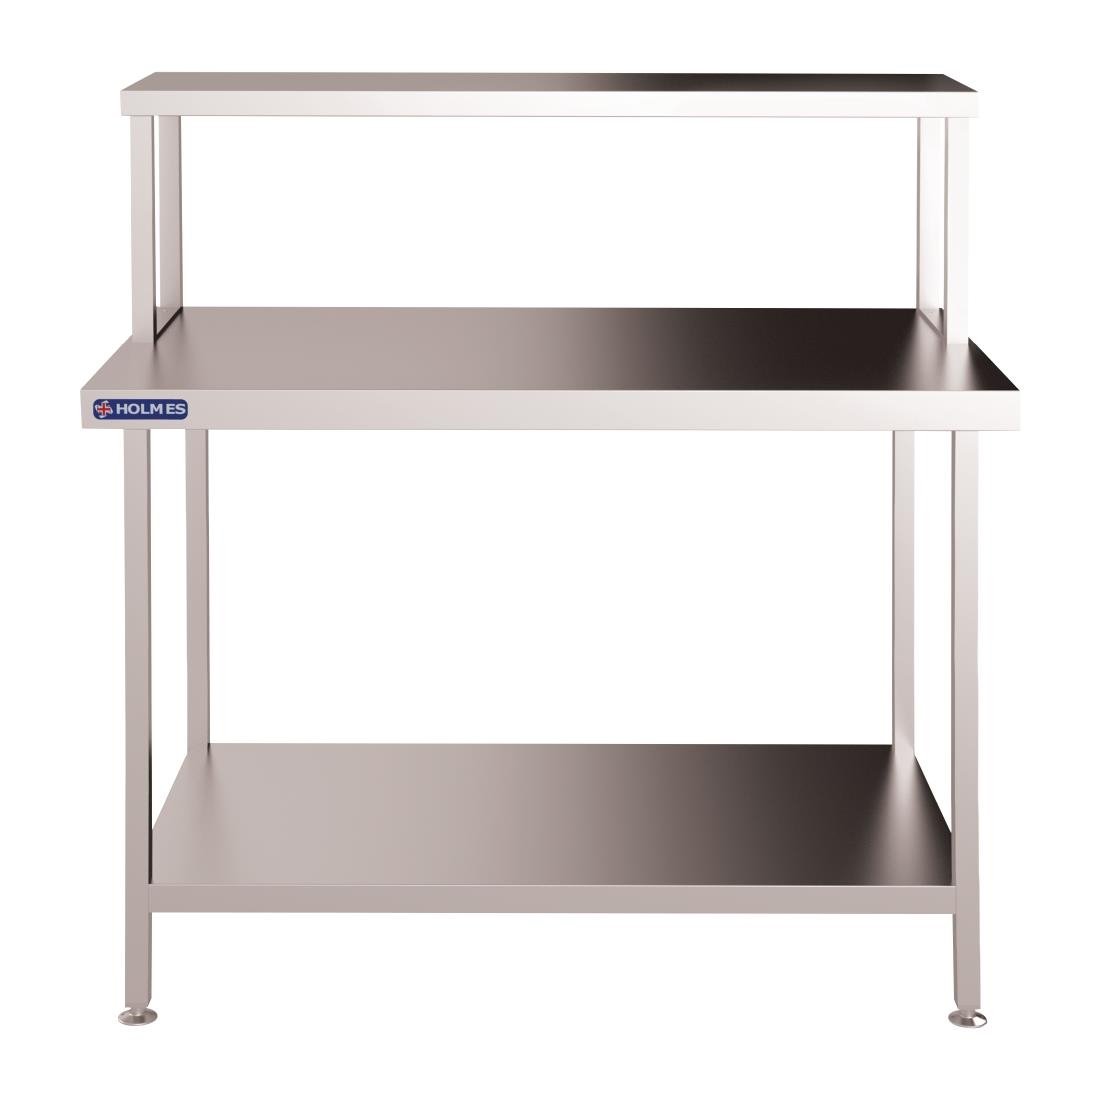 FC450 Holmes Stainless Steel Wall Work Table Welded with Gantry 1500mm JD Catering Equipment Solutions Ltd